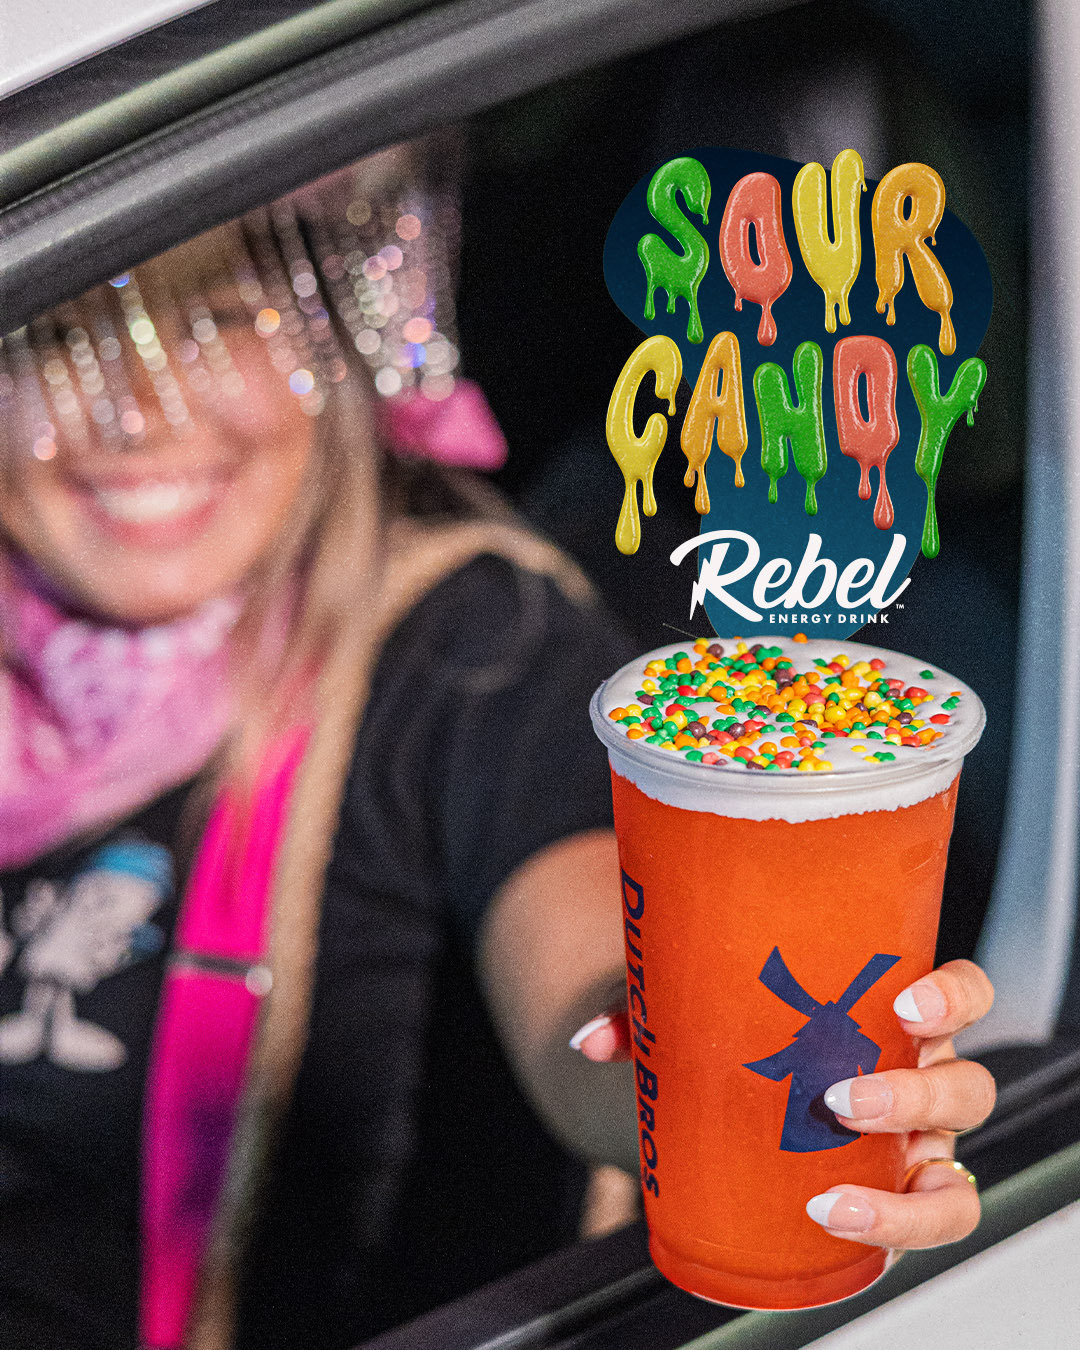 Dutch Bros launches the spooktacular Sour Candy Rebel energy drink for a limited time